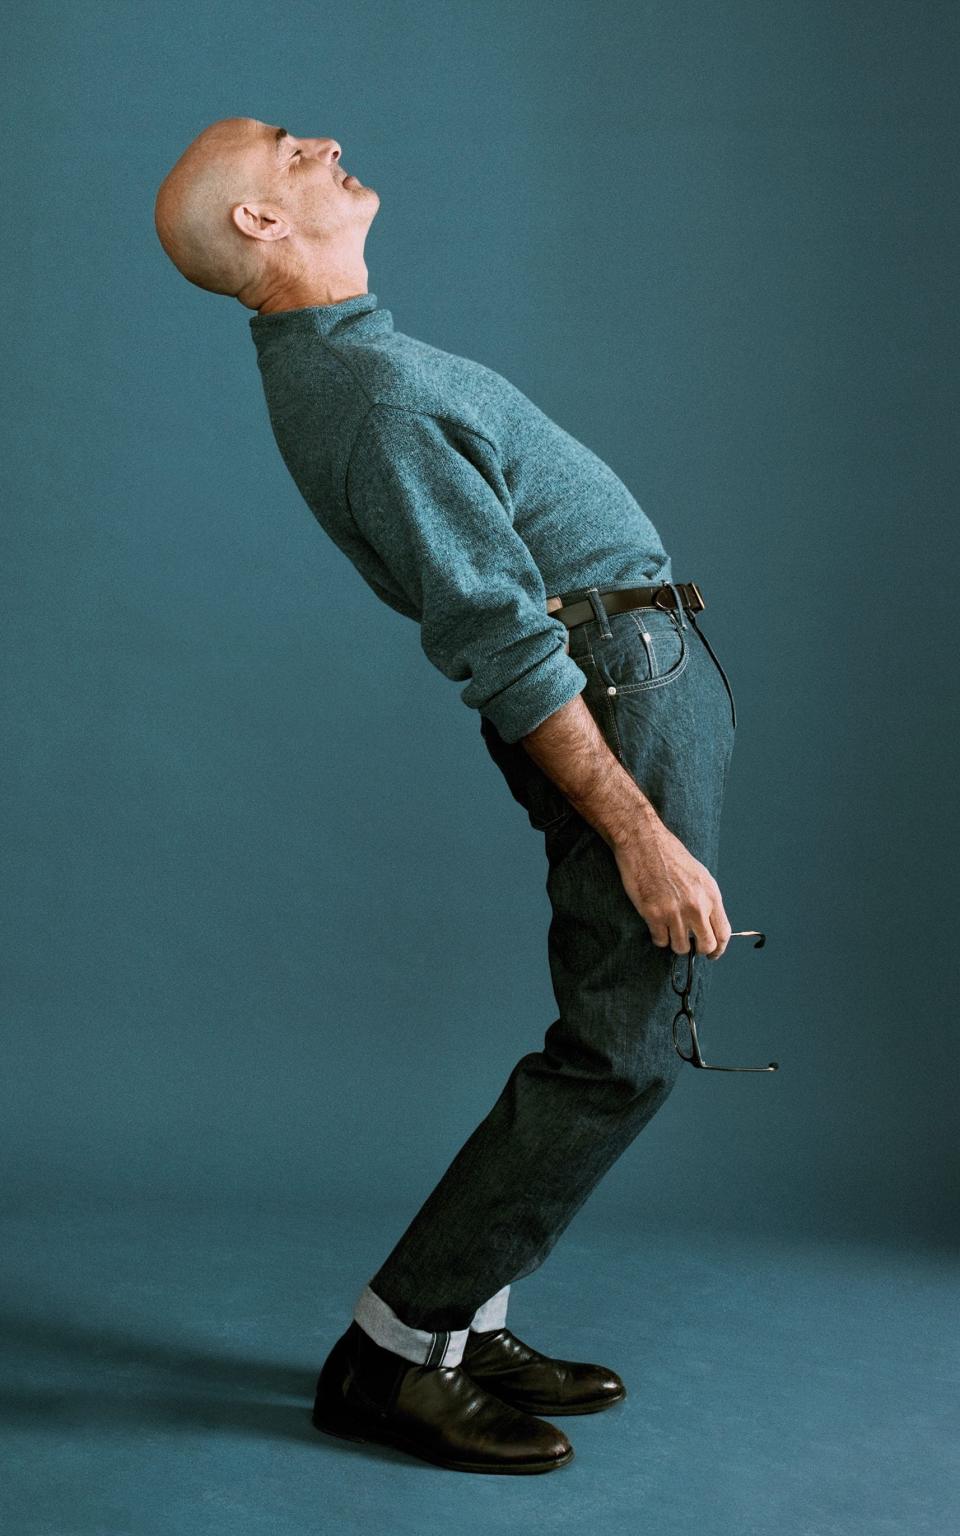 Stanley wears: sweater and jeans, 45R; boots and belt, Tucci’s own - Adam Whitehead; styling by David Nolan